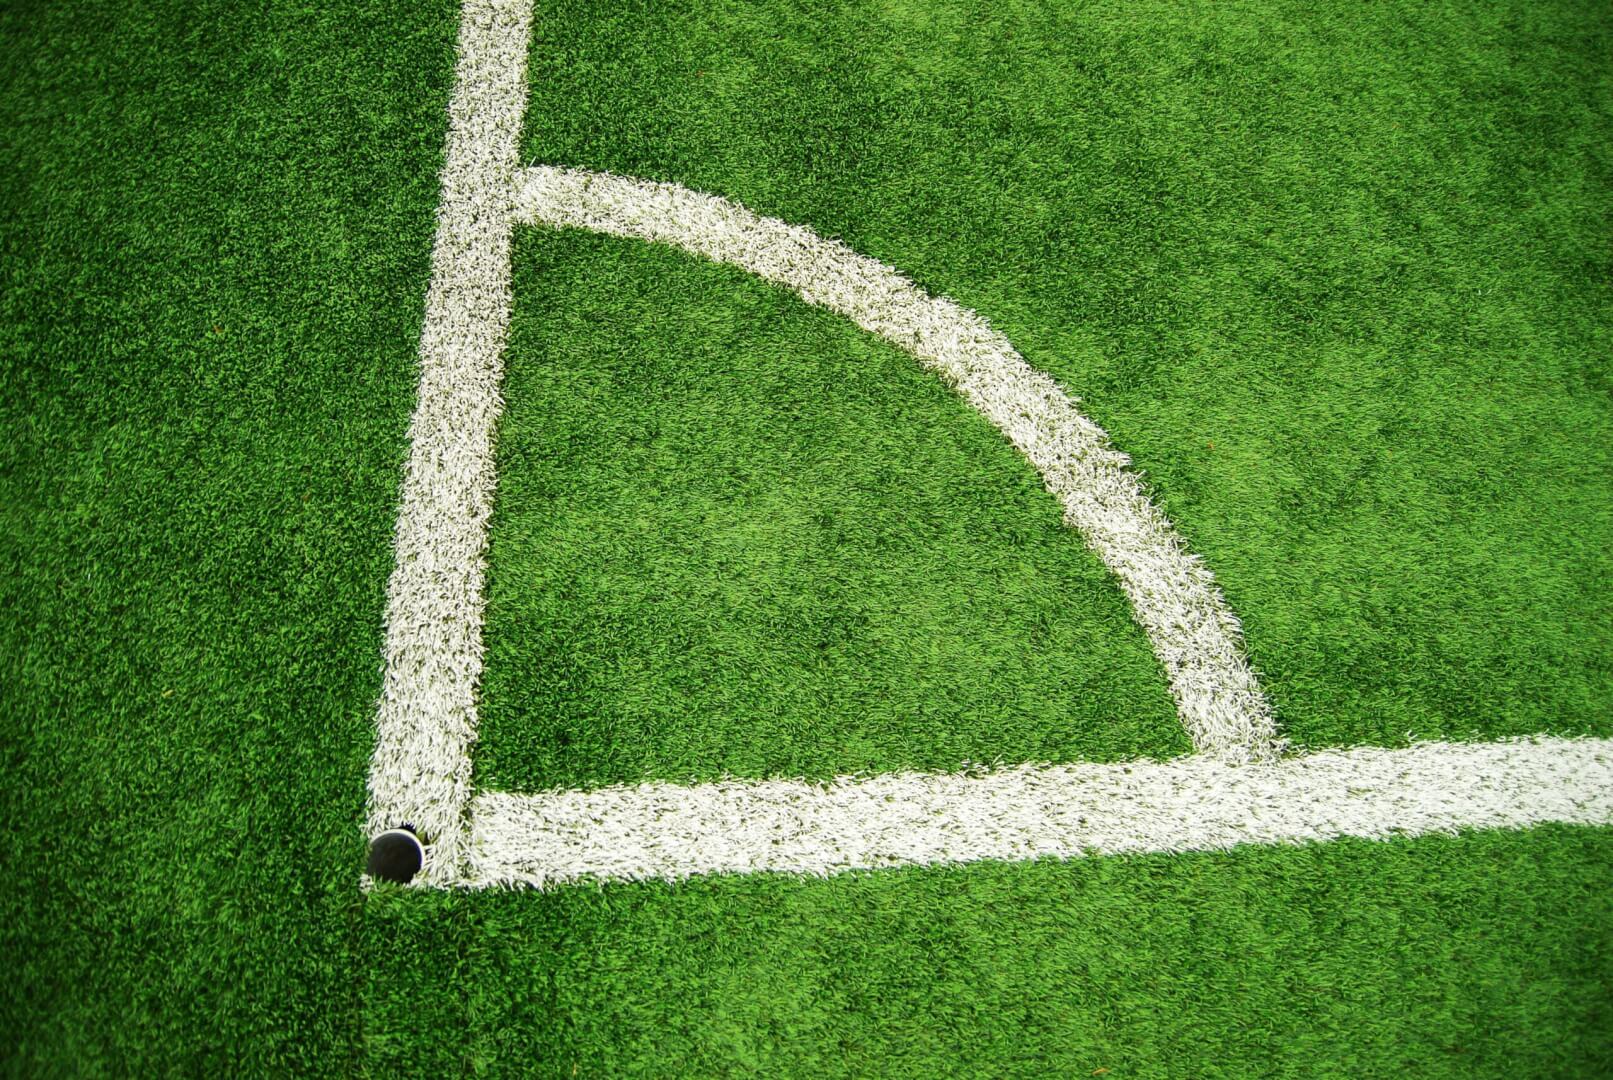 green and white football pitch